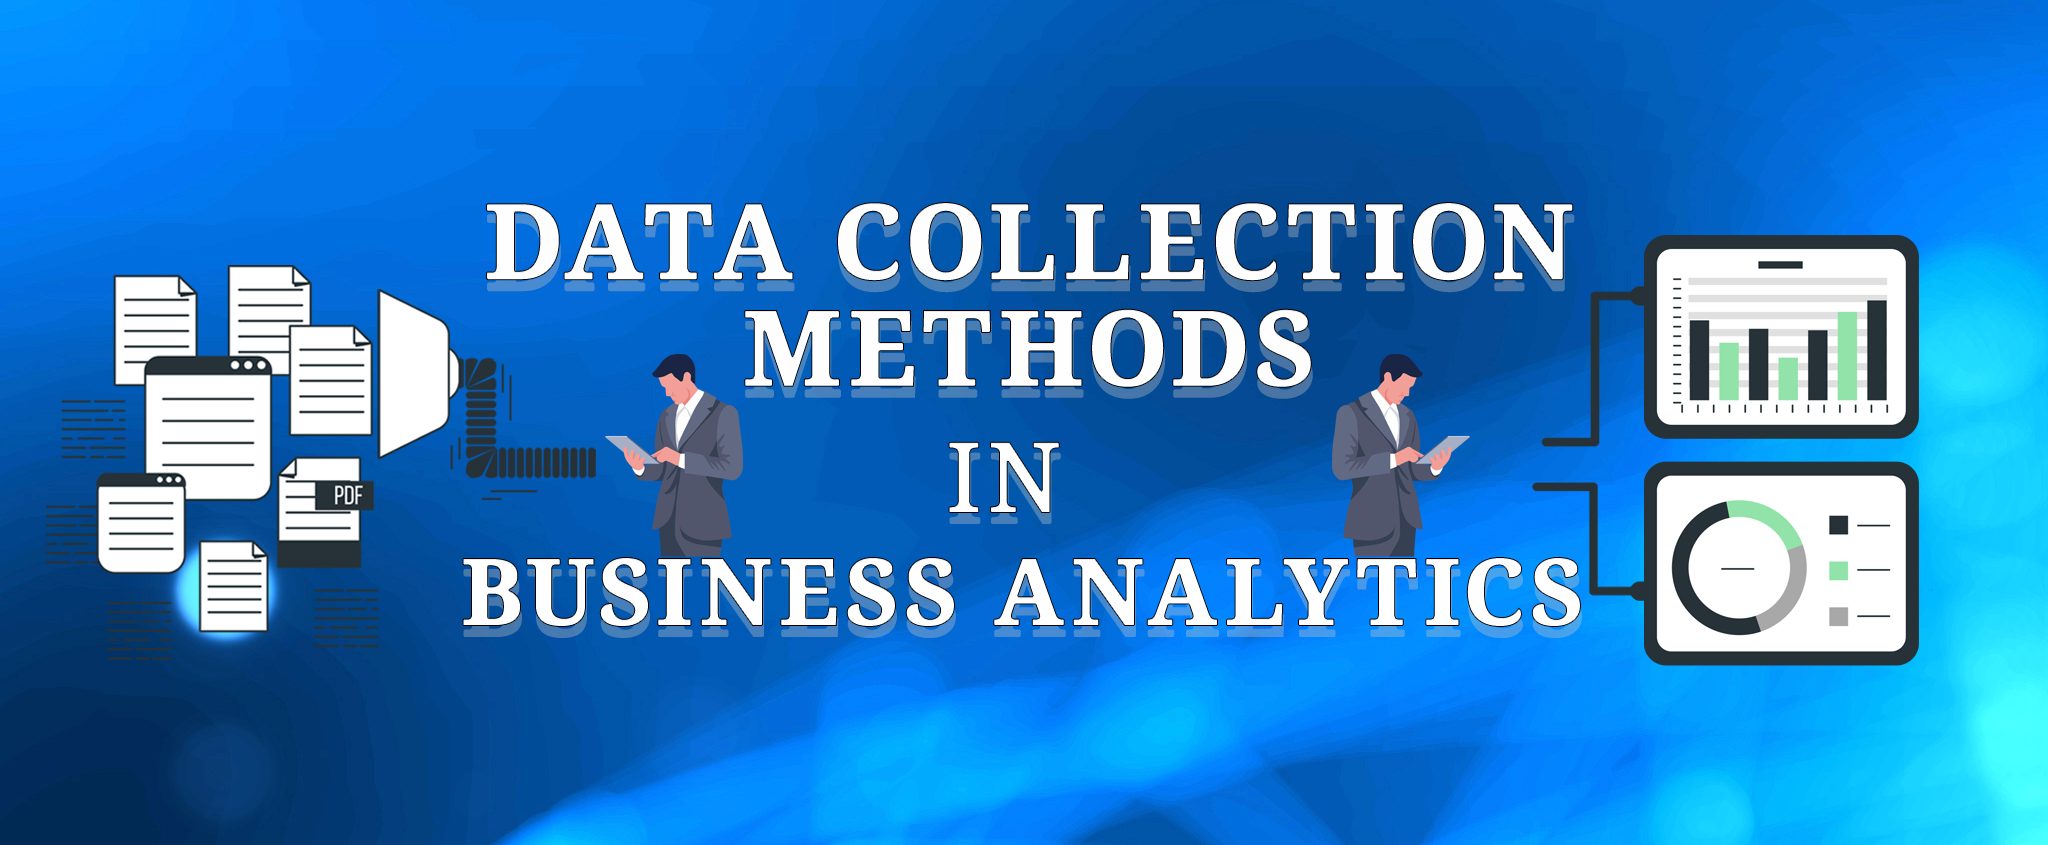 Data Collection Methods in Business Analytics - CCC International